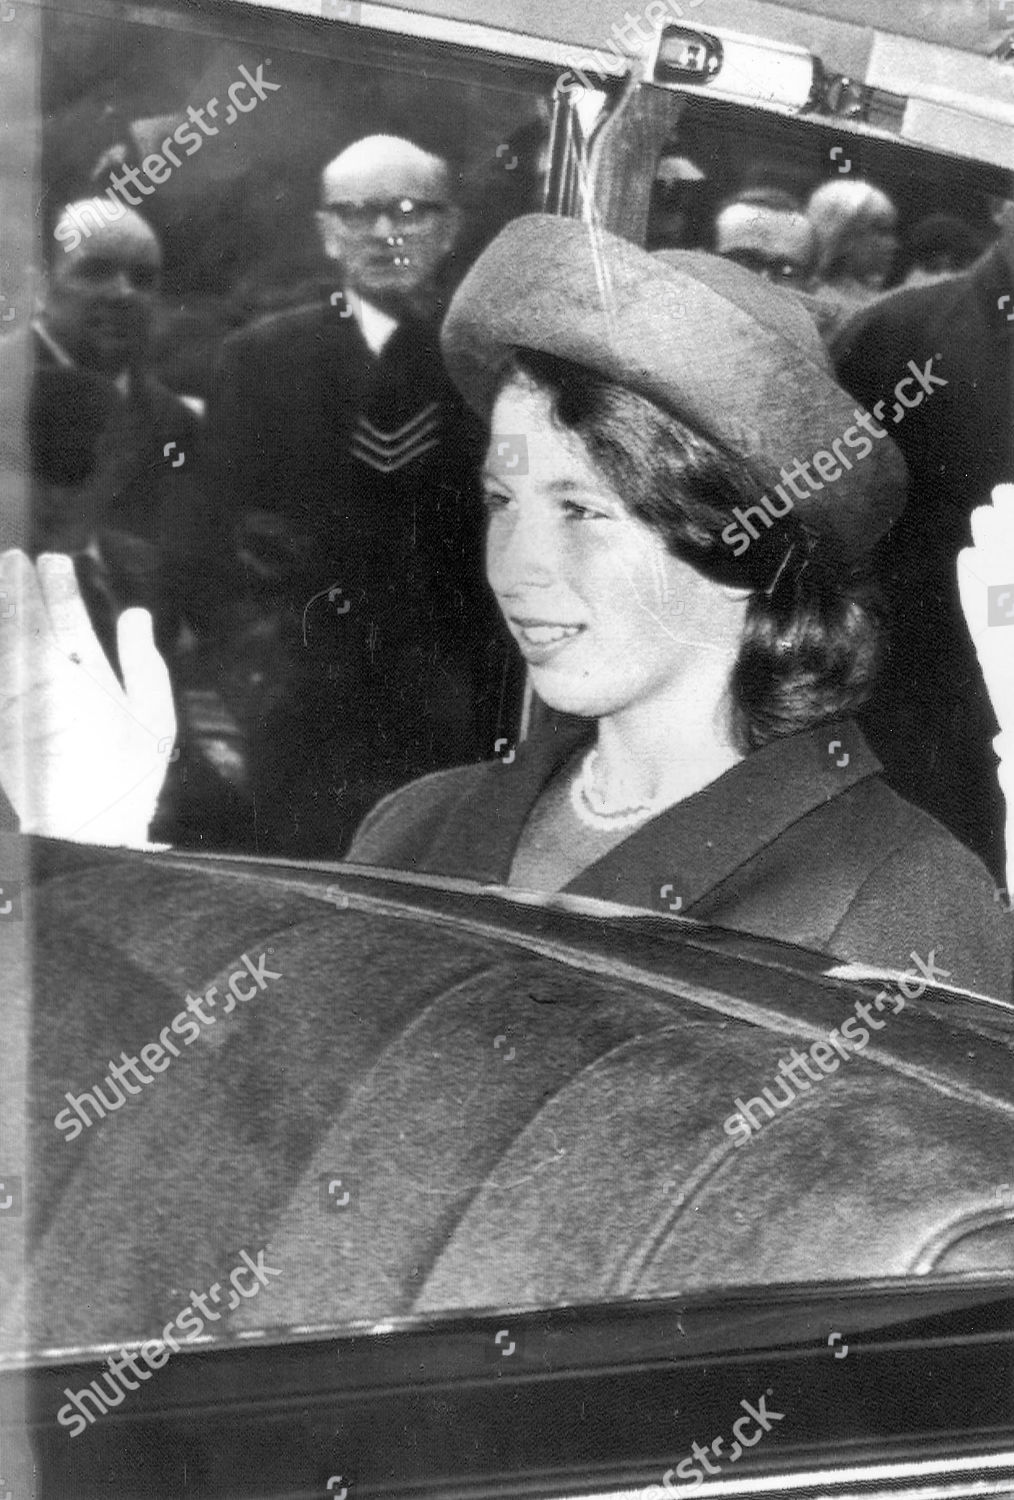 princess-anne-now-princess-royal-1965-picture-shows-princess-anne-arriving-from-balmoral-for-a-church-service-at-crathie-shutterstock-editorial-890779a.jpg